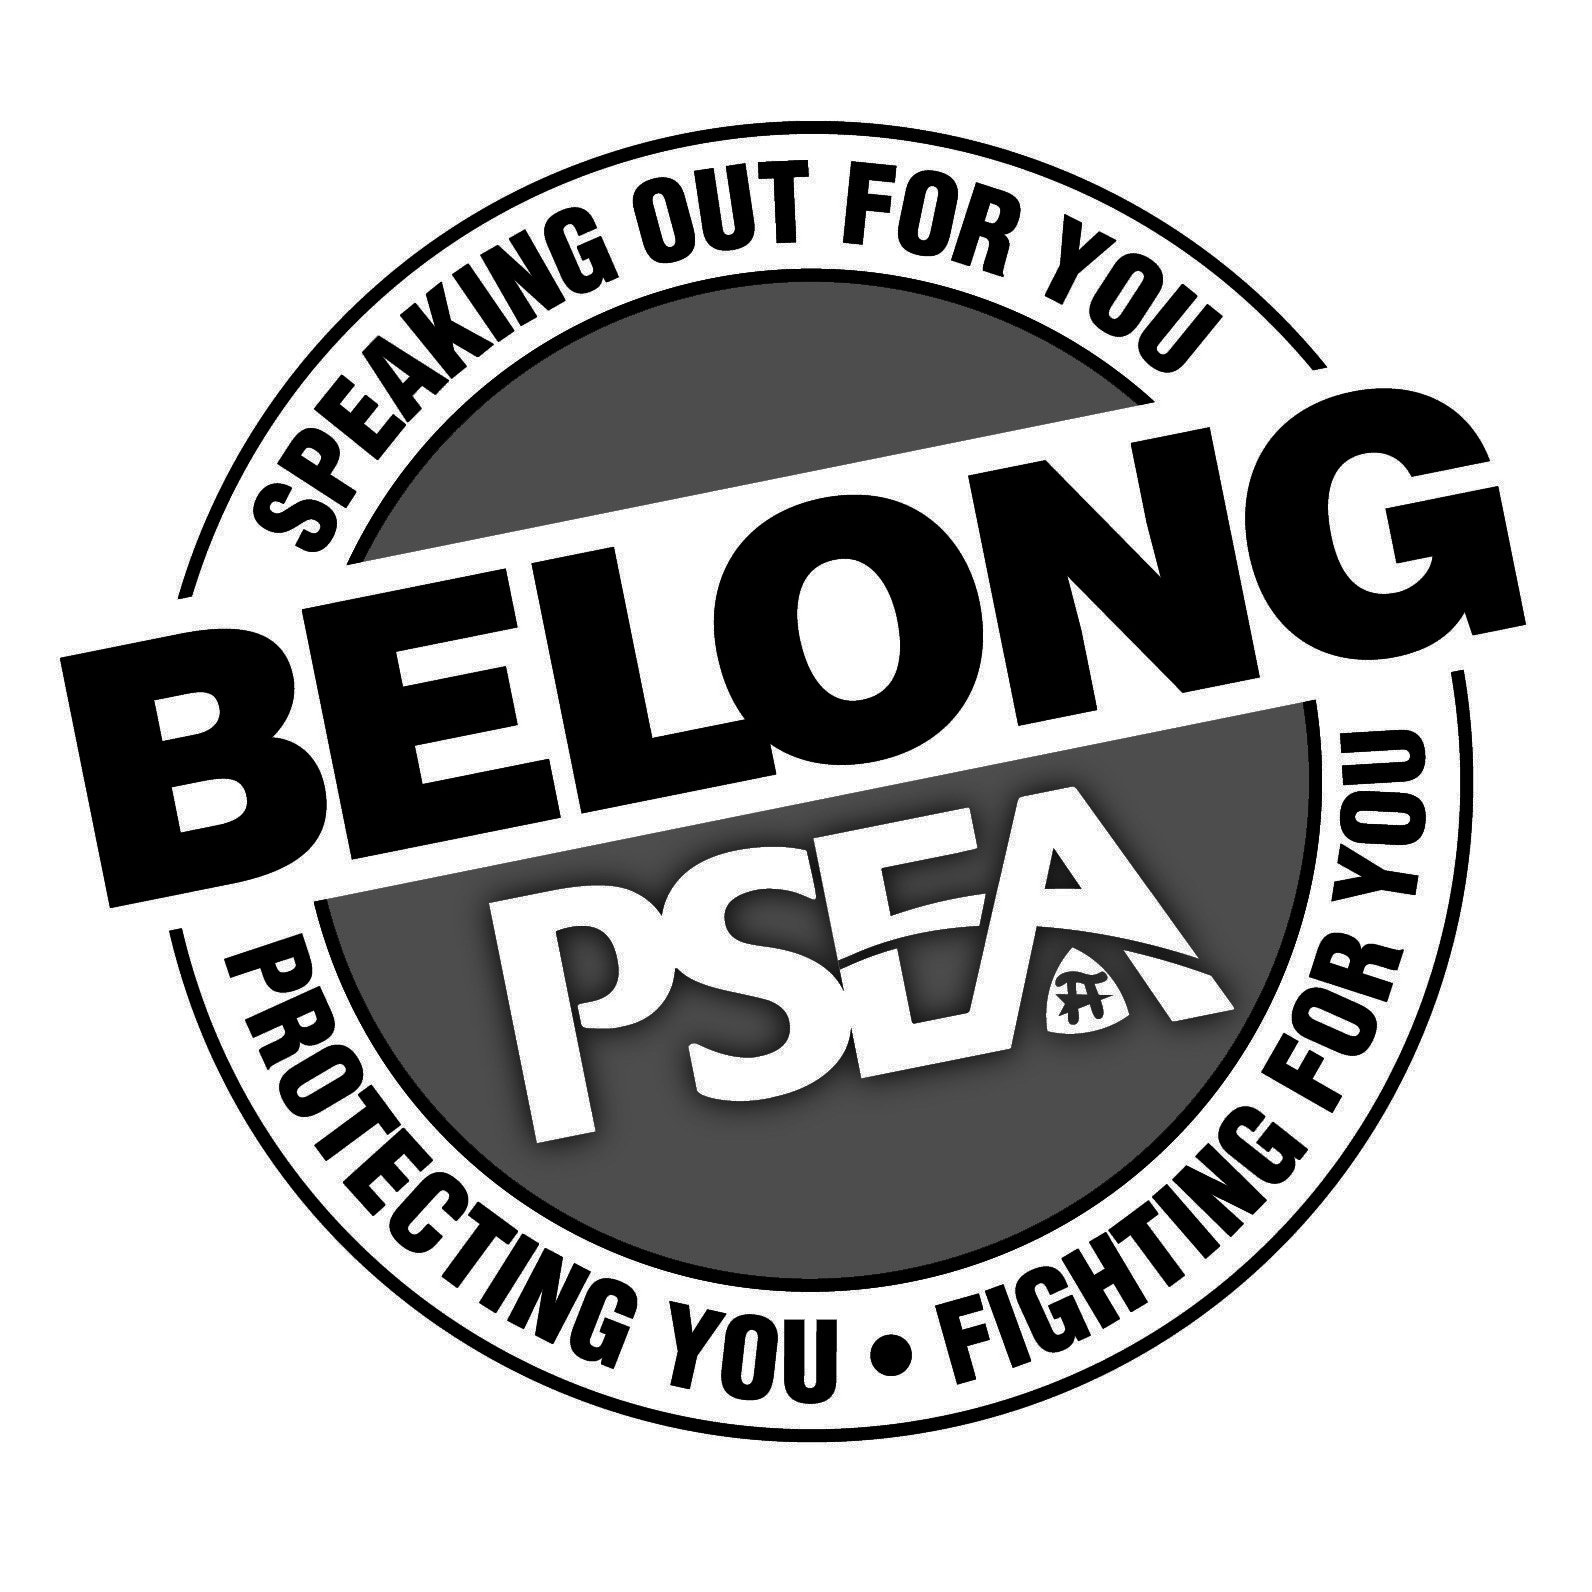 Trademark Logo SPEAKING OUT FOR YOU BELONG PSEA PROTECTING YOU ·FIGHTING FOR YOU